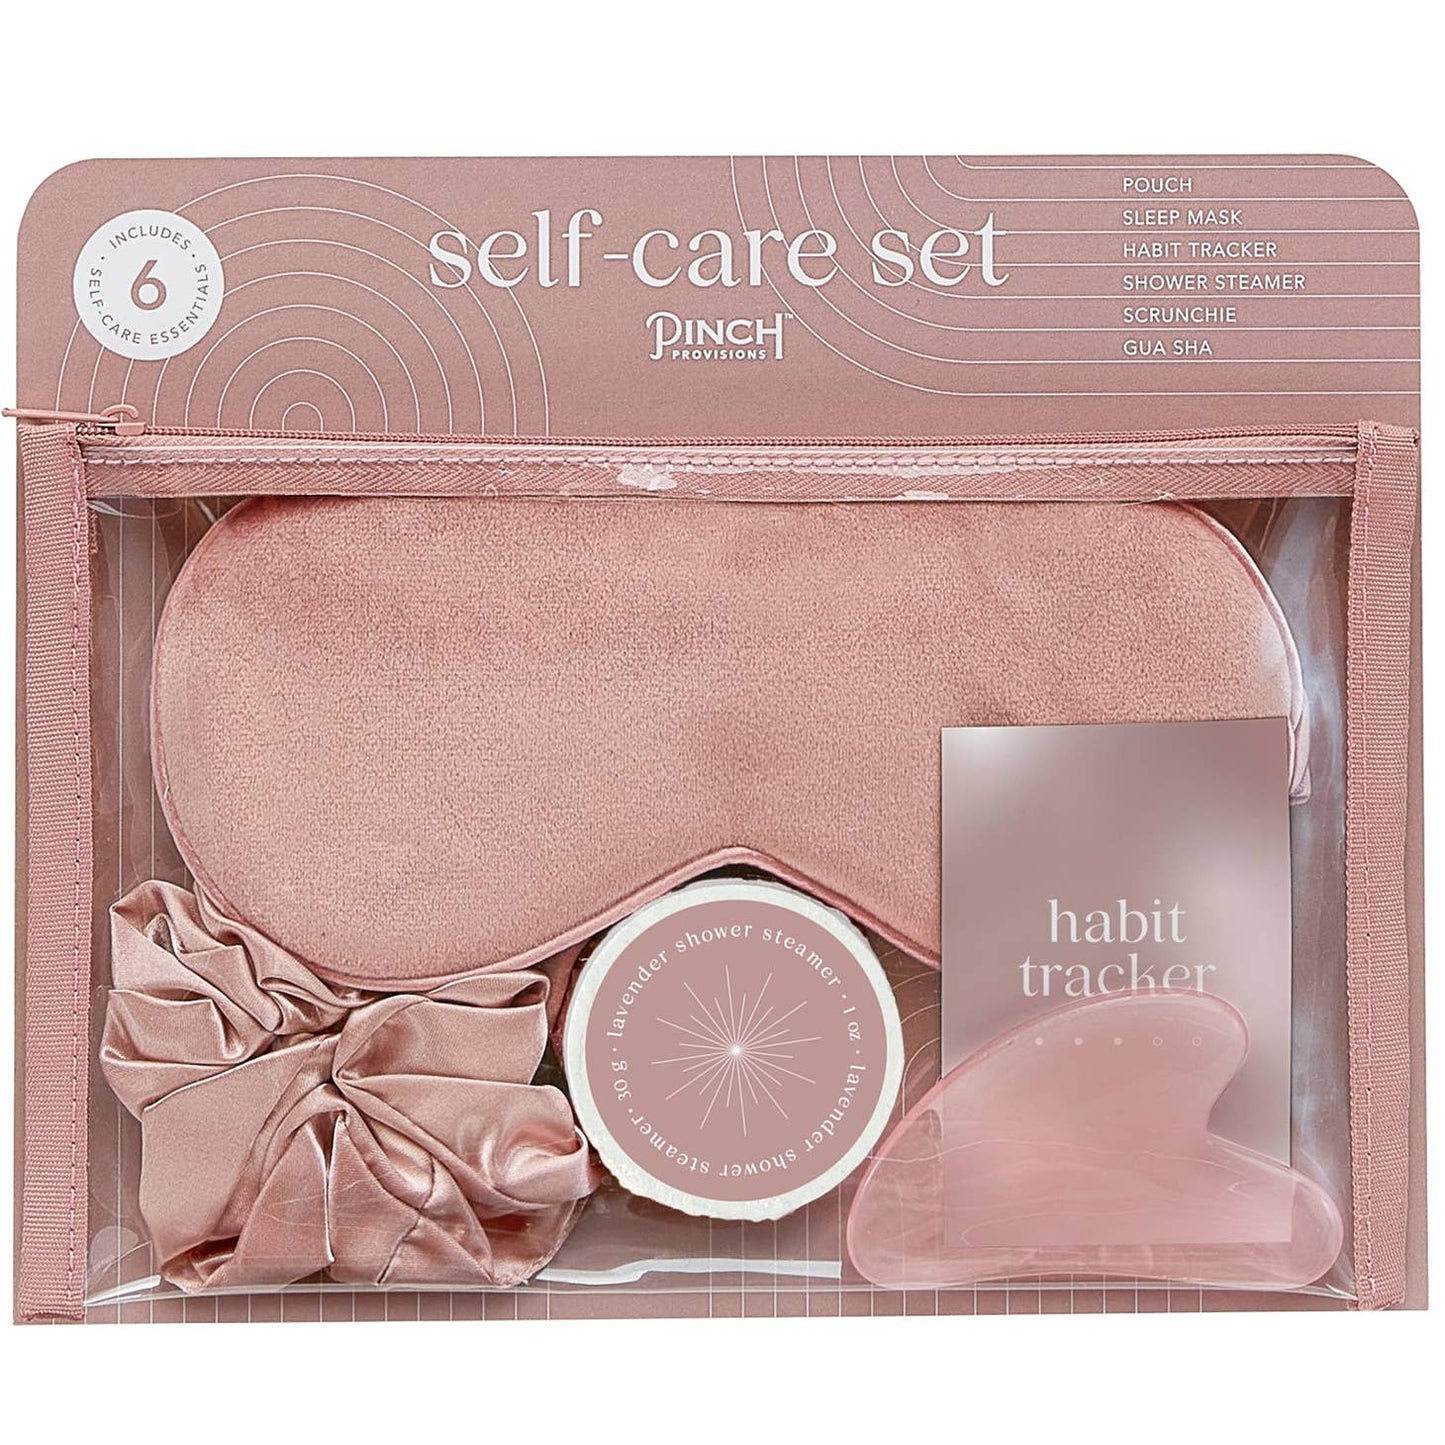 Self-Care Set from Favorite Little Things